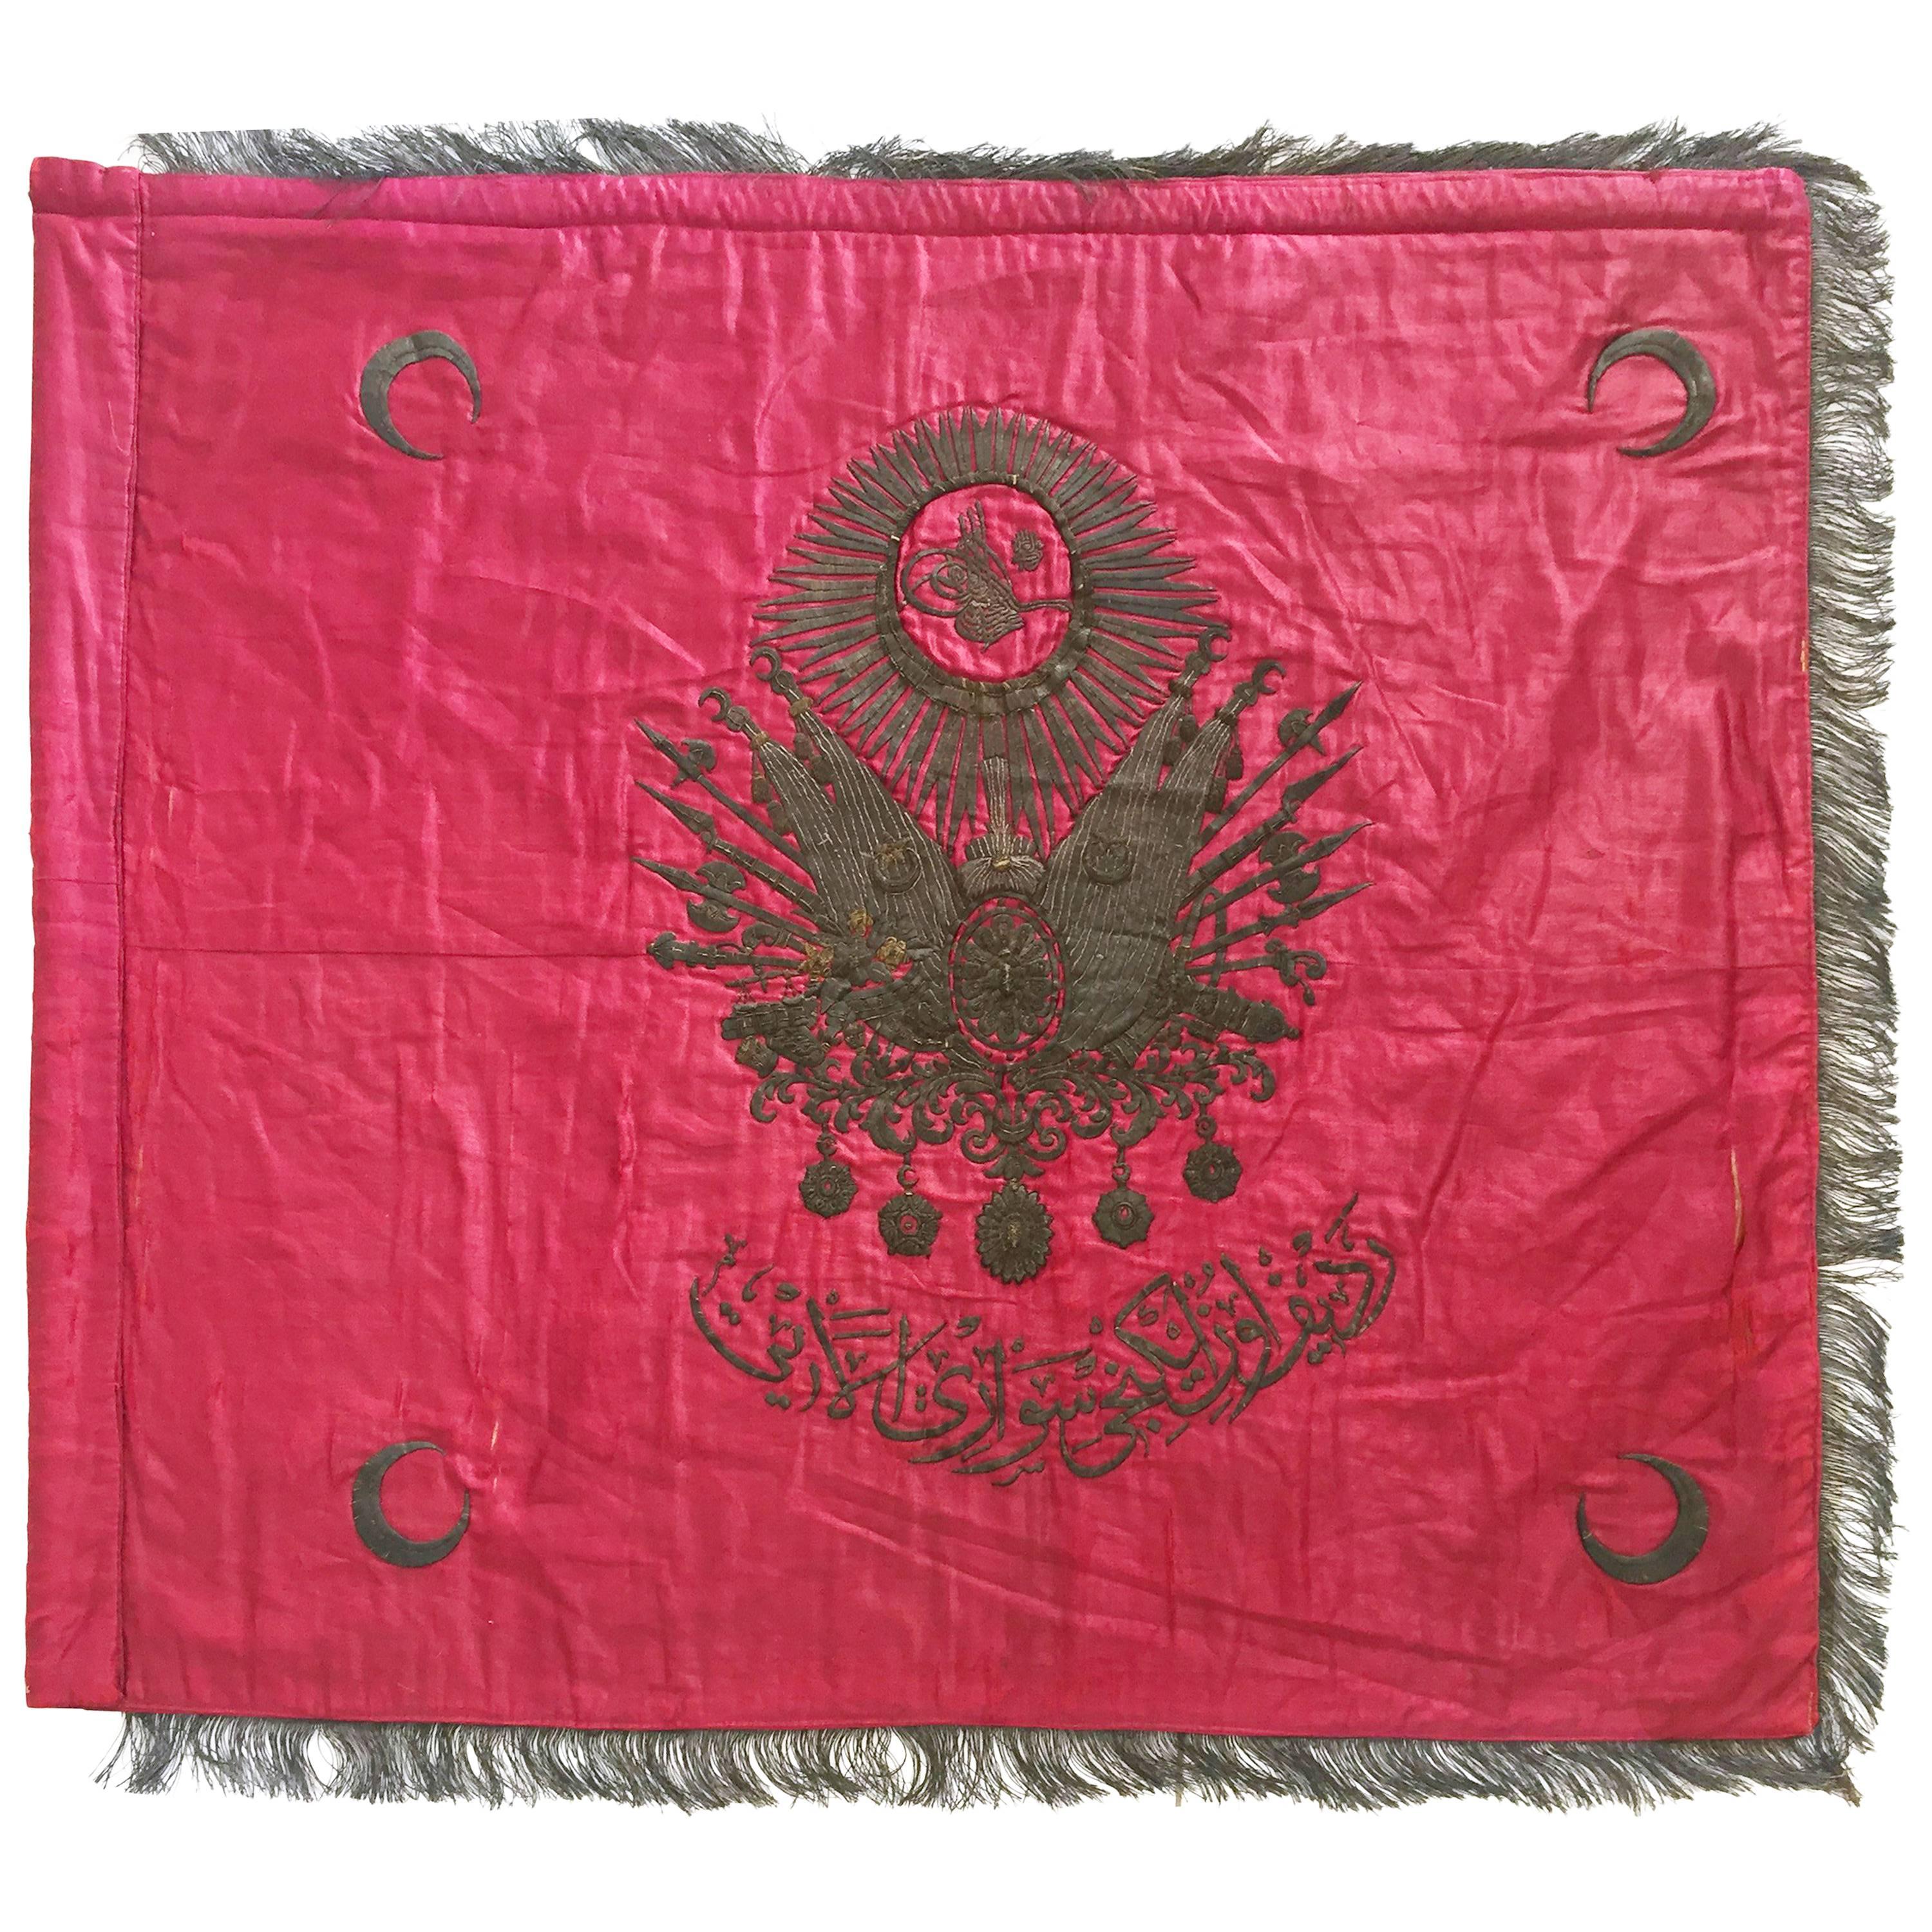 19th Century Ottoman Banner with the Tugrah of Sultan Abdulhamid II